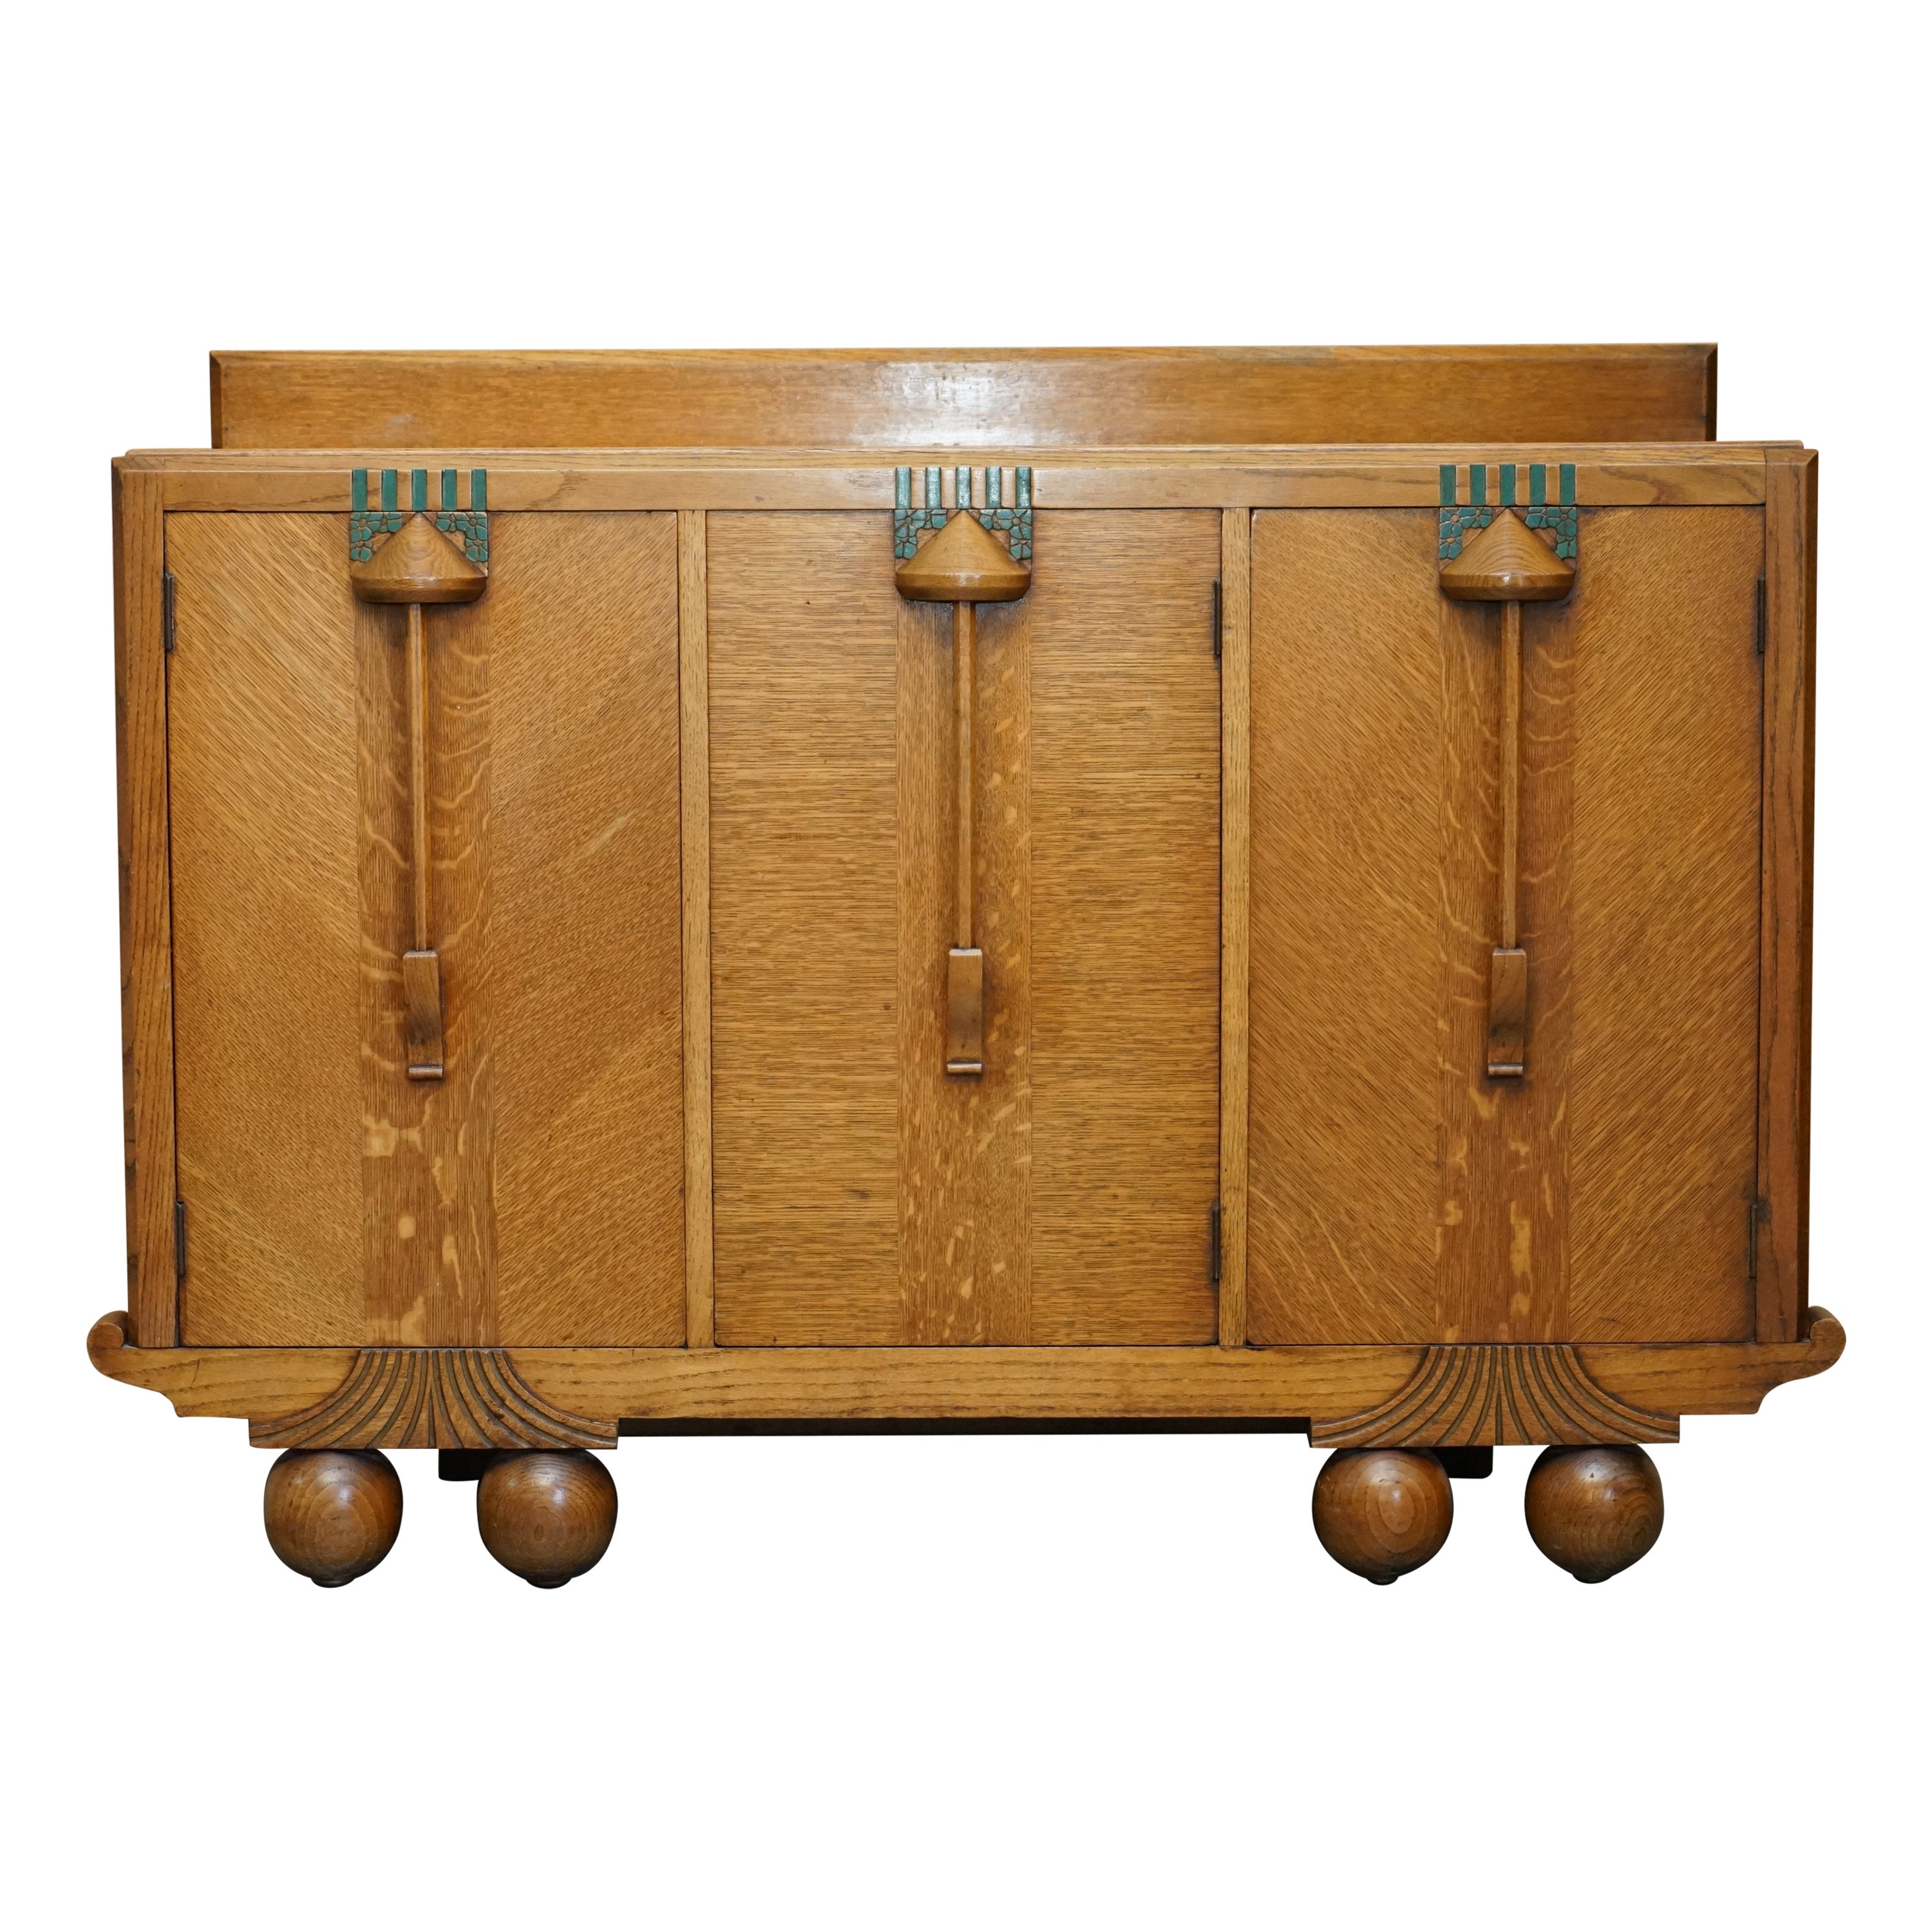 FINE LIBERTY'S COTSWOLD ART DECO OAK CARVED SiDEBOARD CIRCA 1920 PART OF A SUITE For Sale